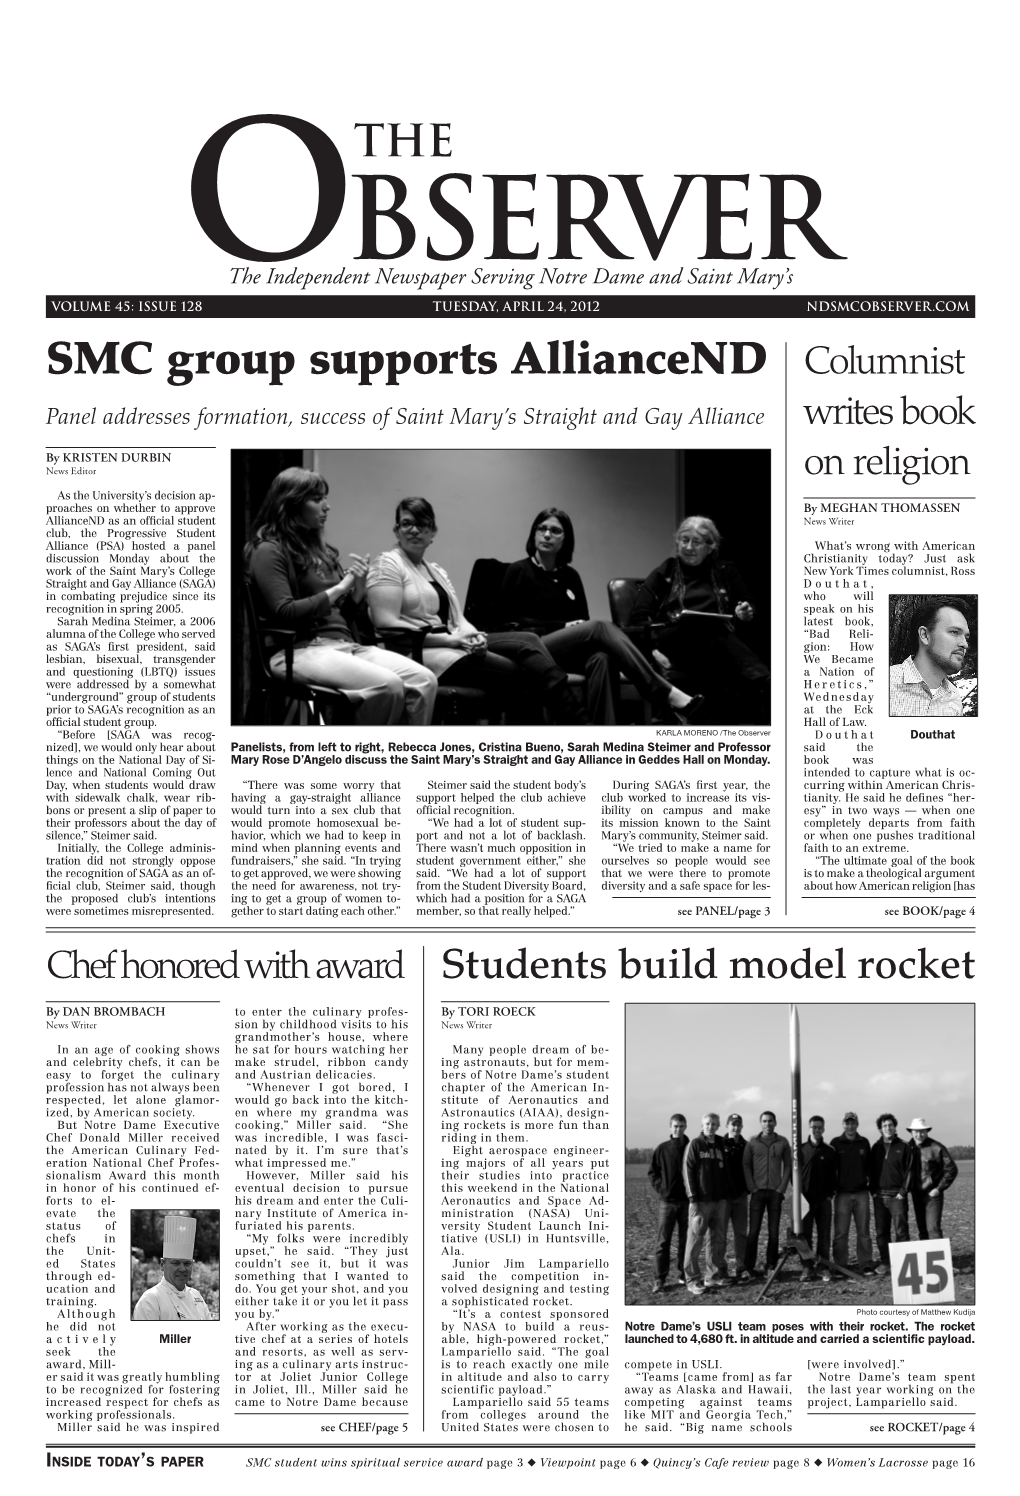 SMC Group Supports Alliancend Columnist Panel Addresses Formation, Success of Saint Mary’S Straight and Gay Alliance Writes Book